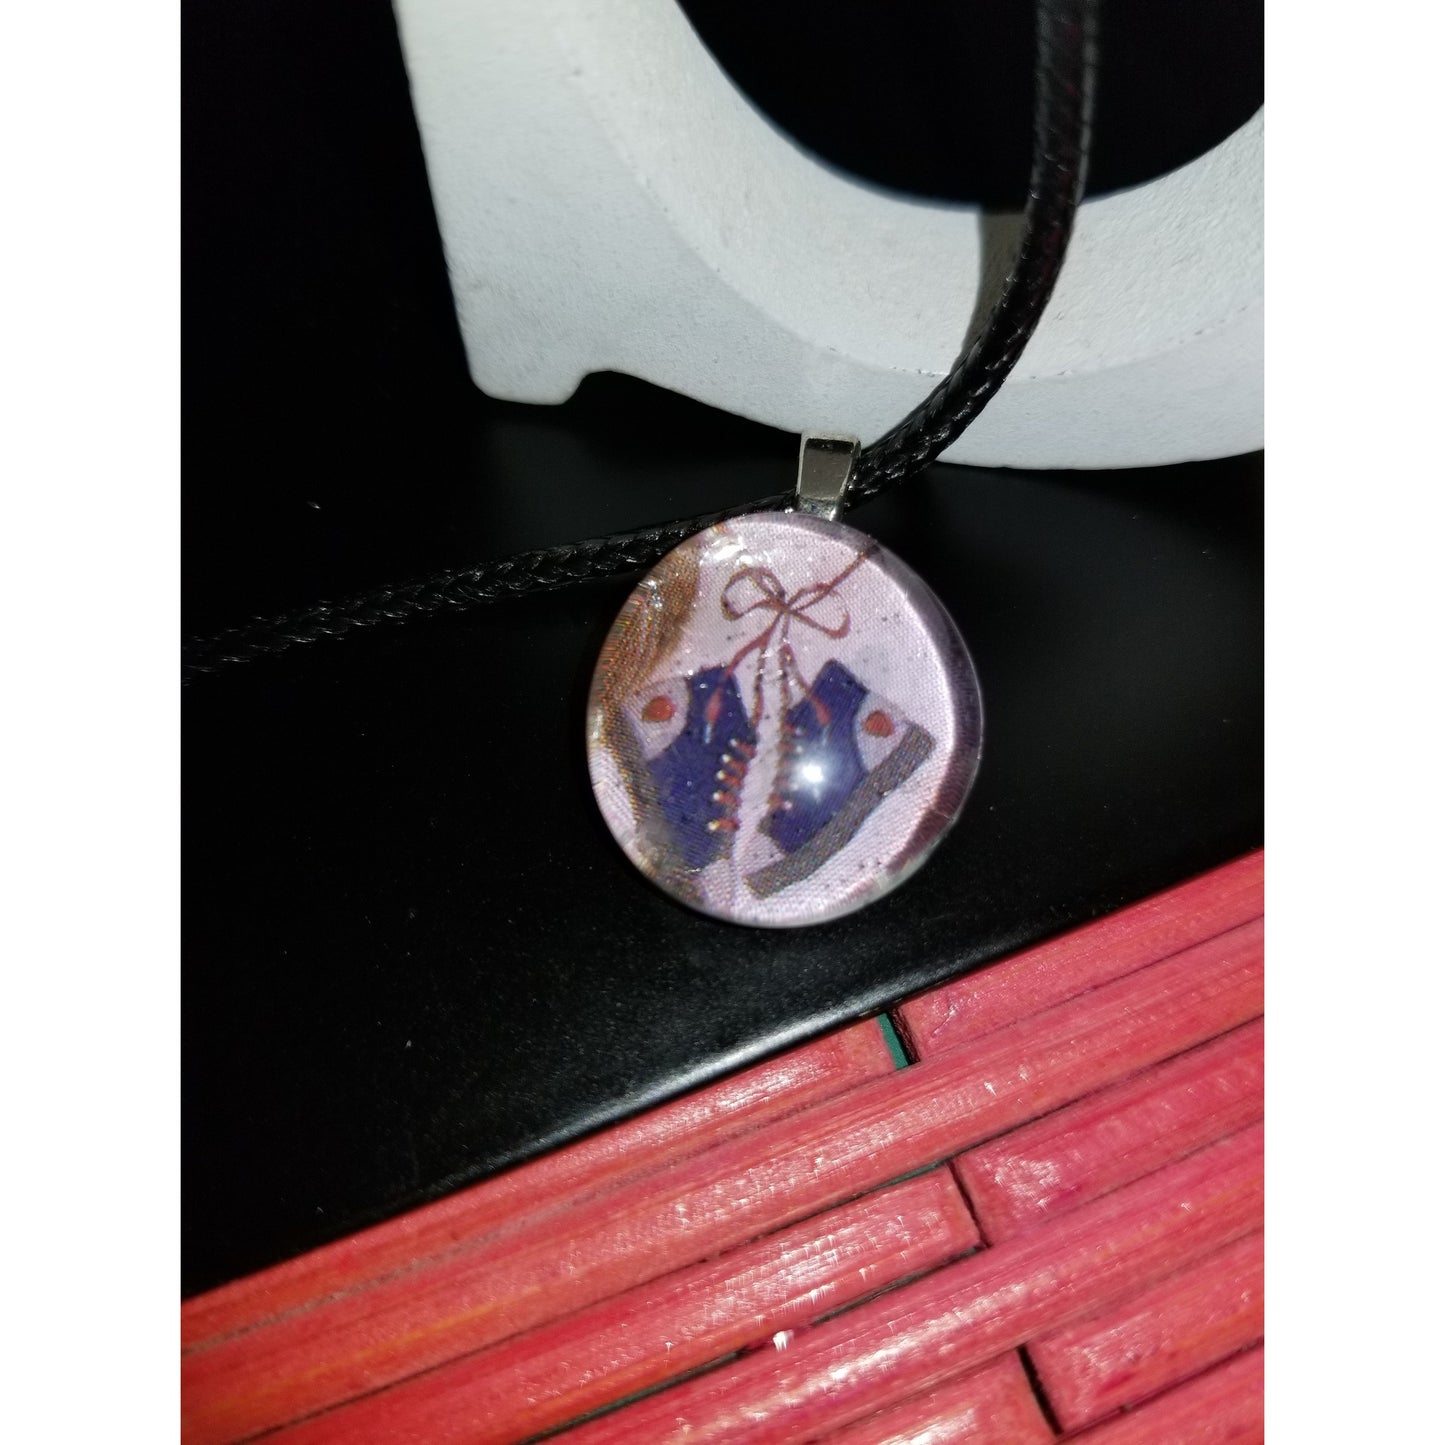 Sneakers Queen Handmade Good Flat Back Glass Marble Necklace 💋